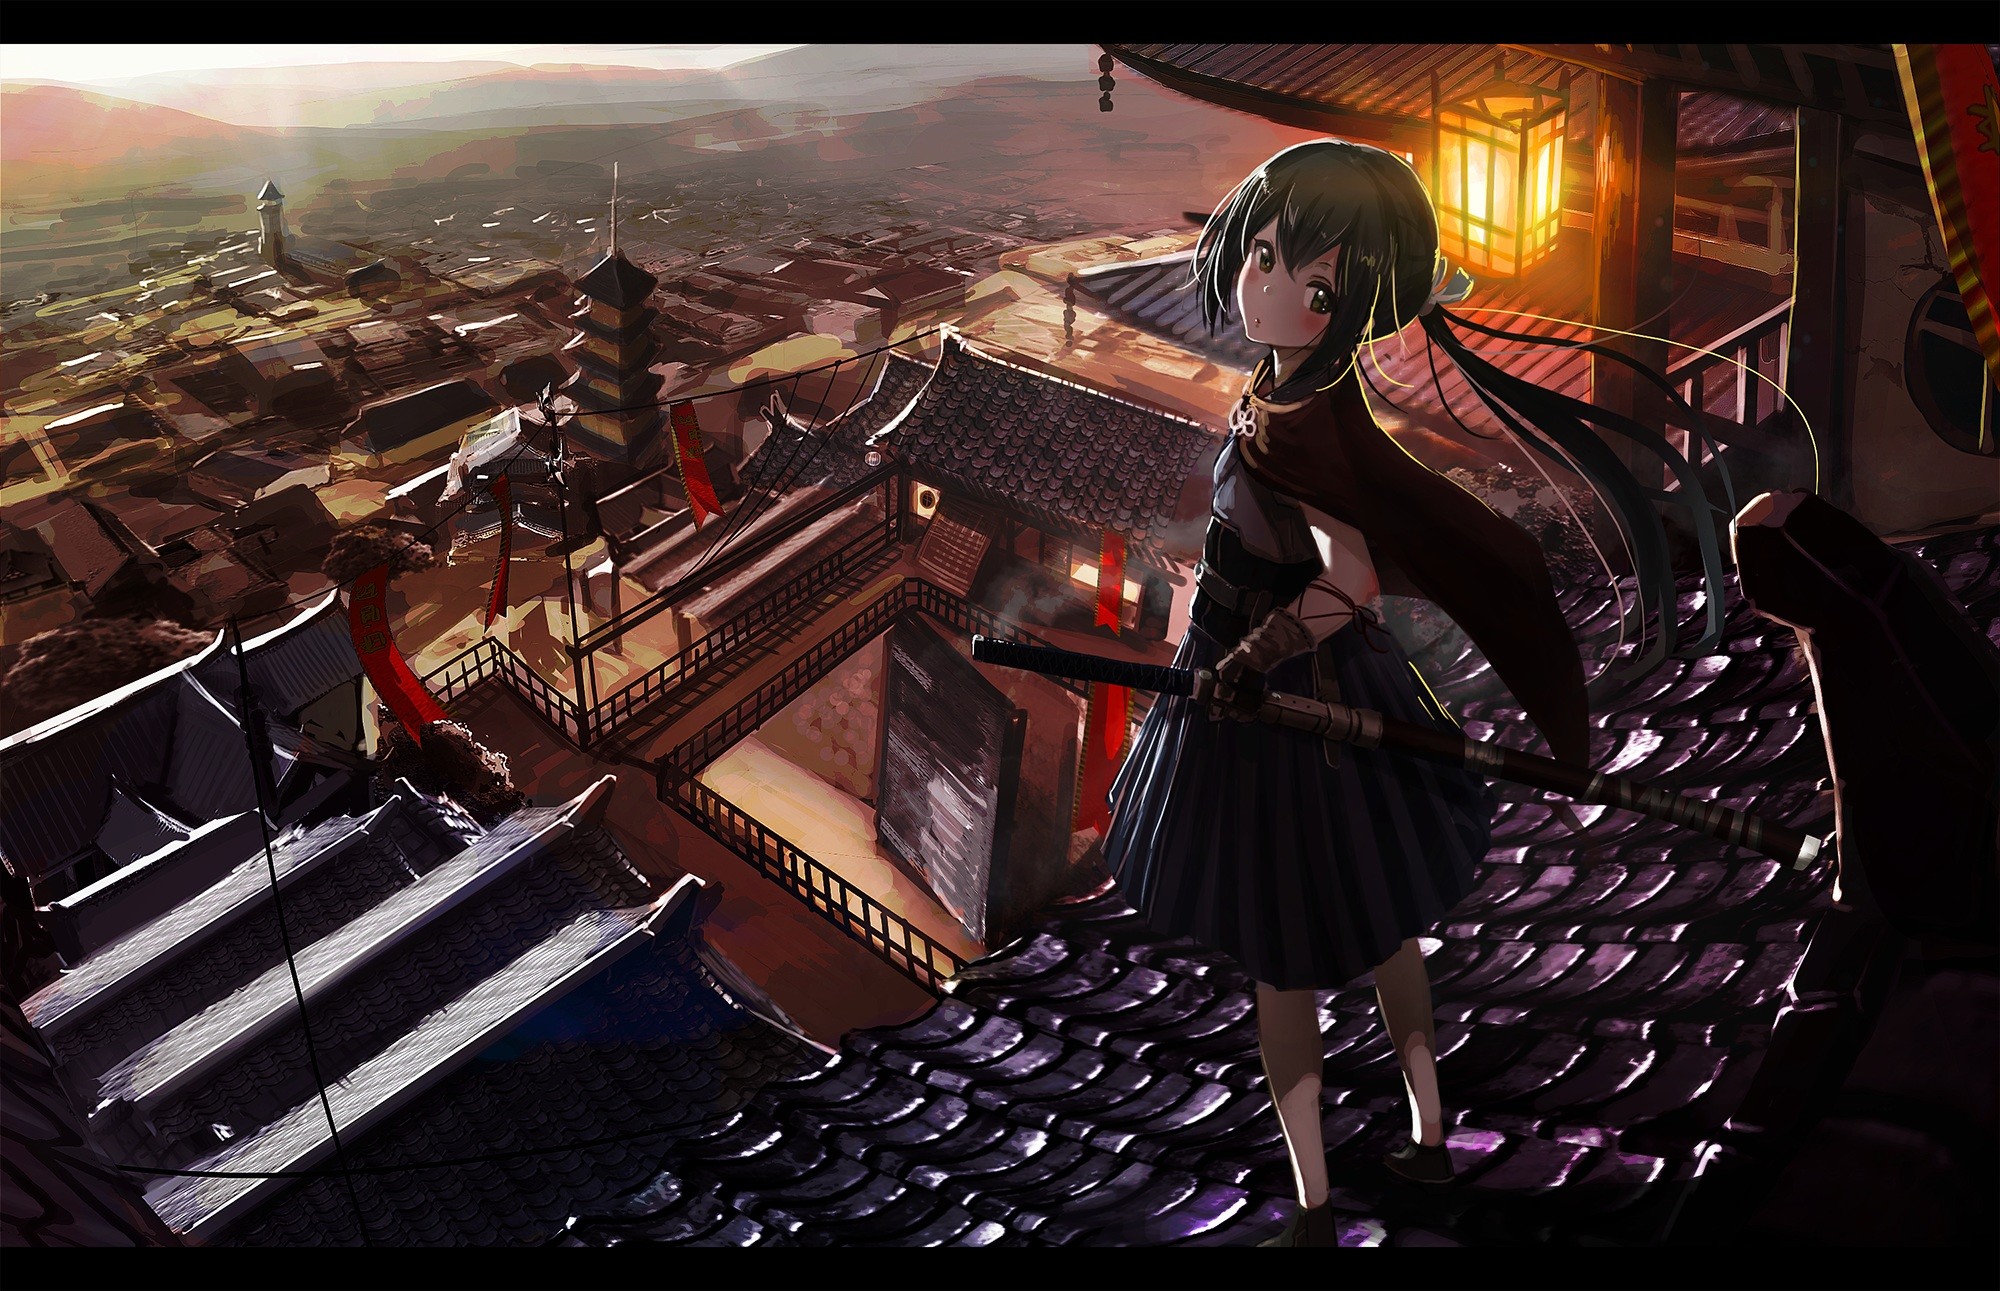 Anime 2000x1291 anime anime girls Japanese clothes sword katana long hair Pixiv rooftops cityscape women outdoors fantasy city fantasy art fantasy girl looking at viewer weapon standing